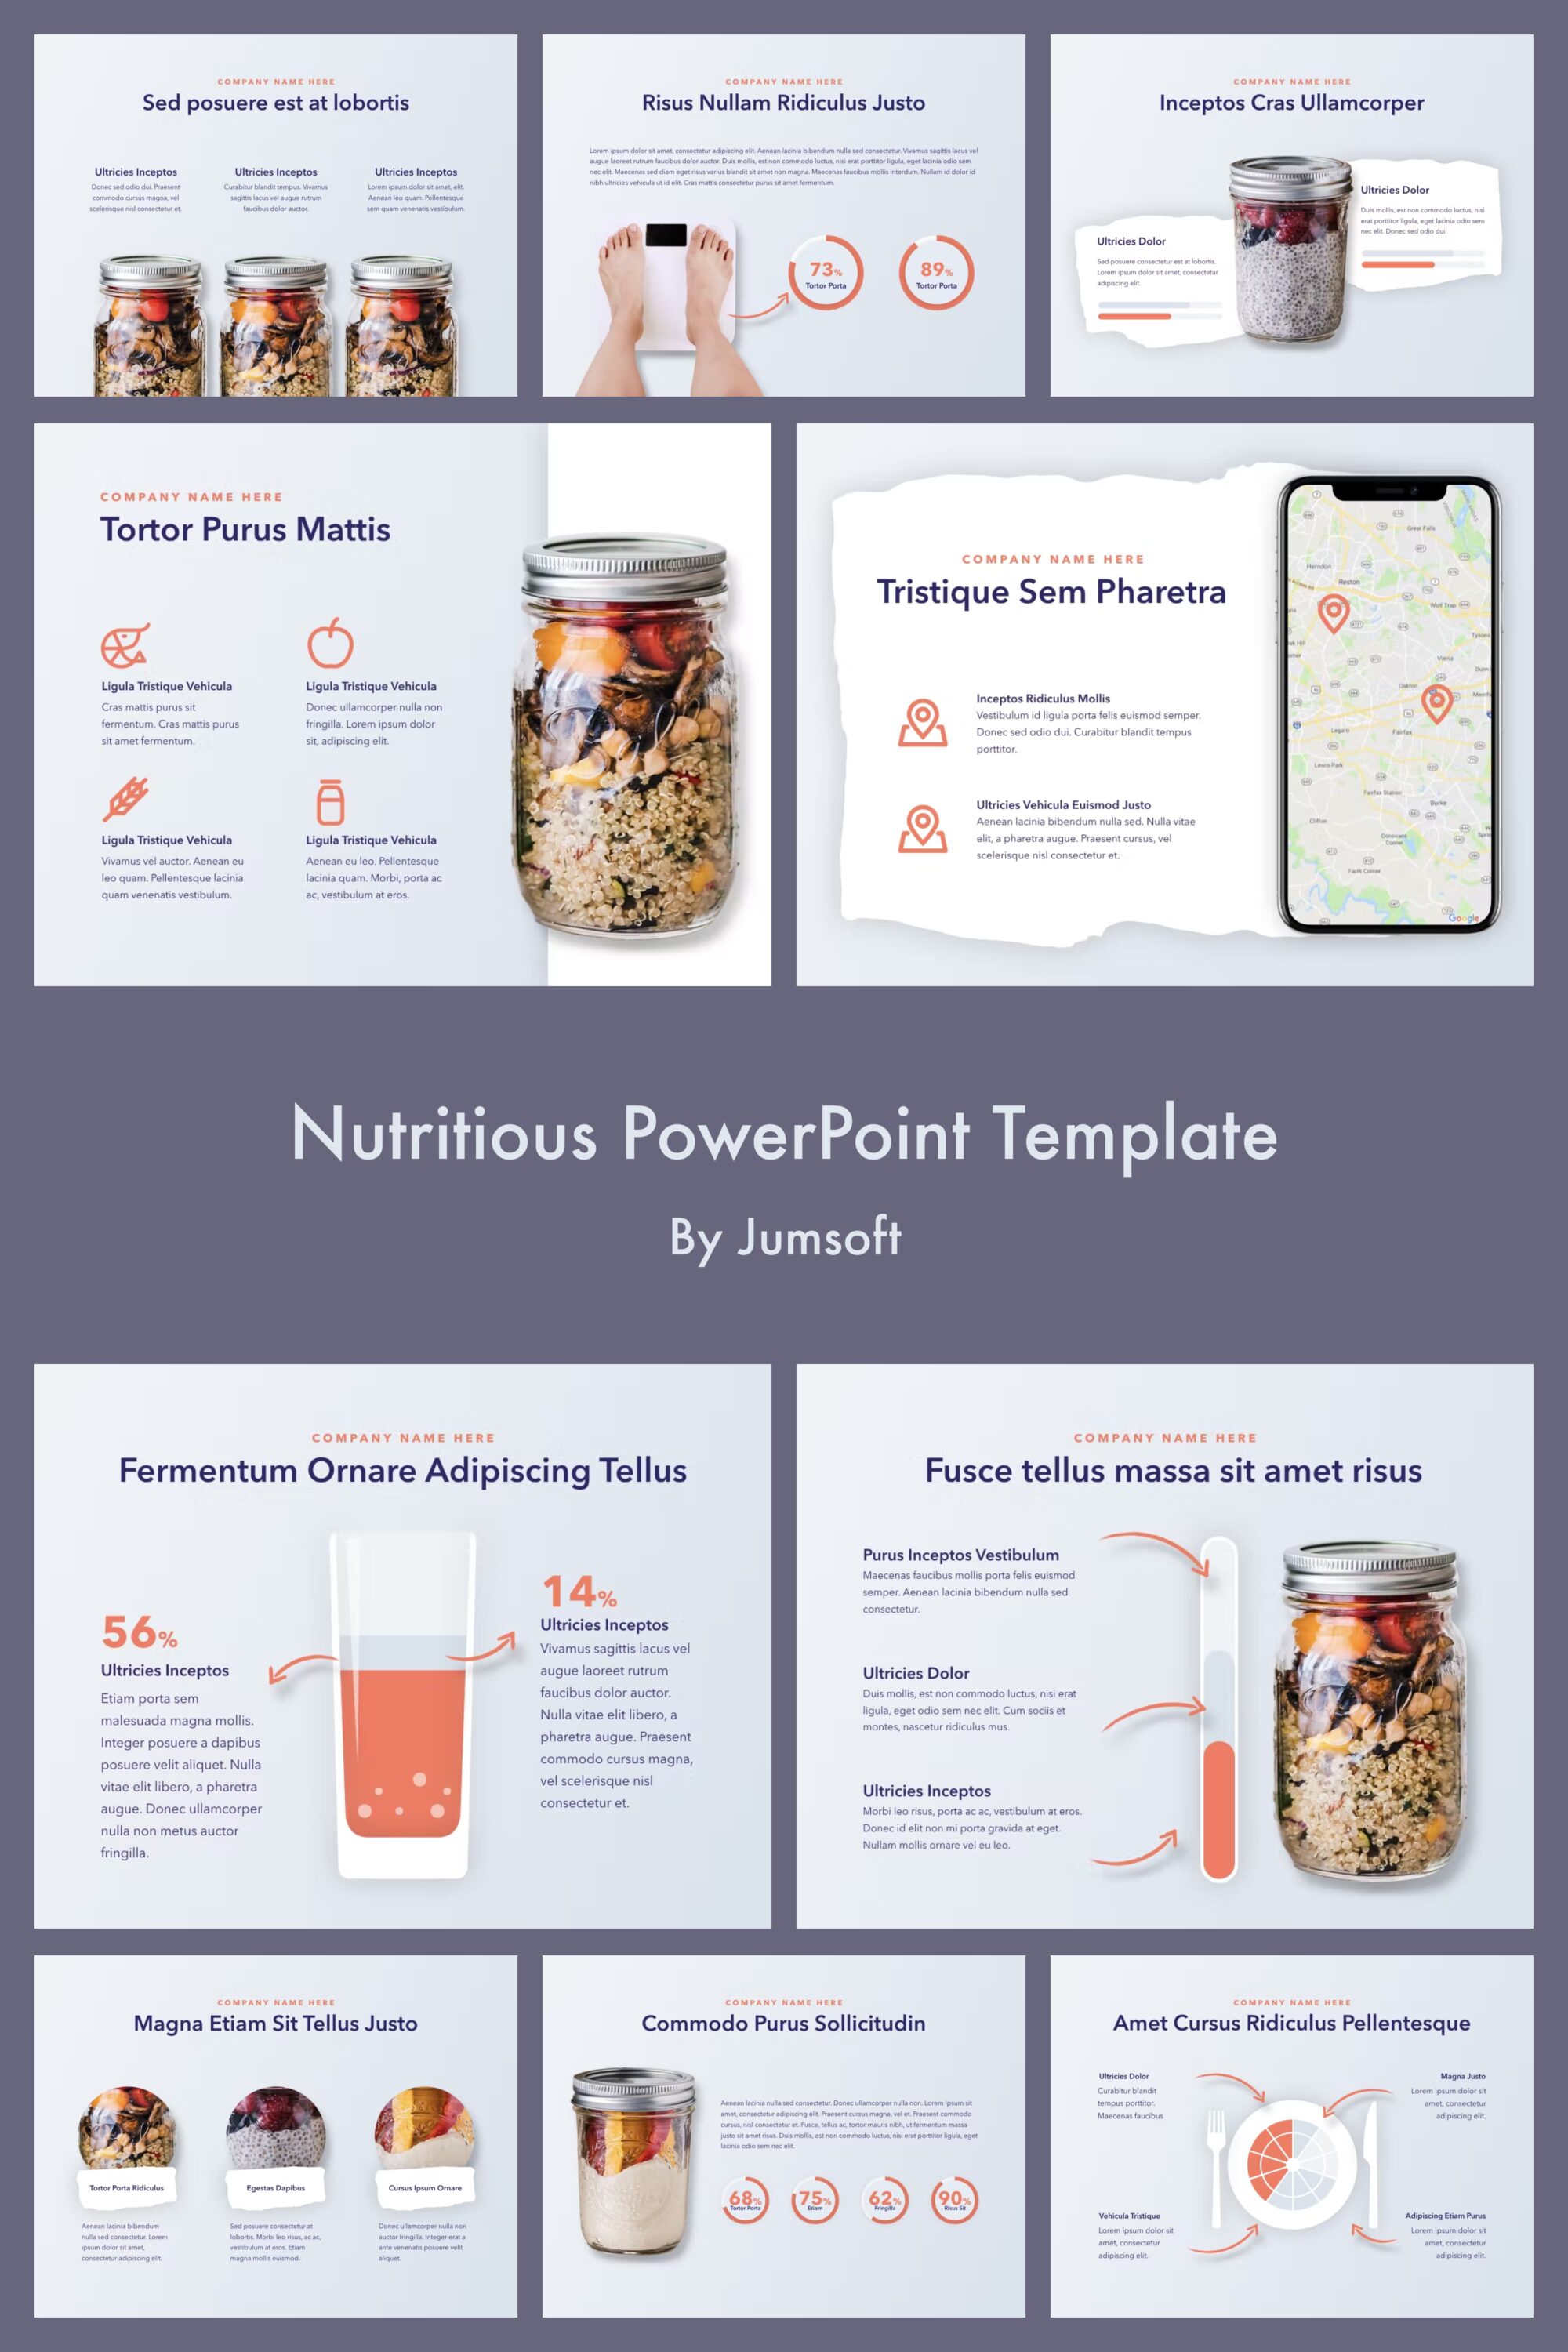 Nutritious PowerPoint Template - pinterest image preview.